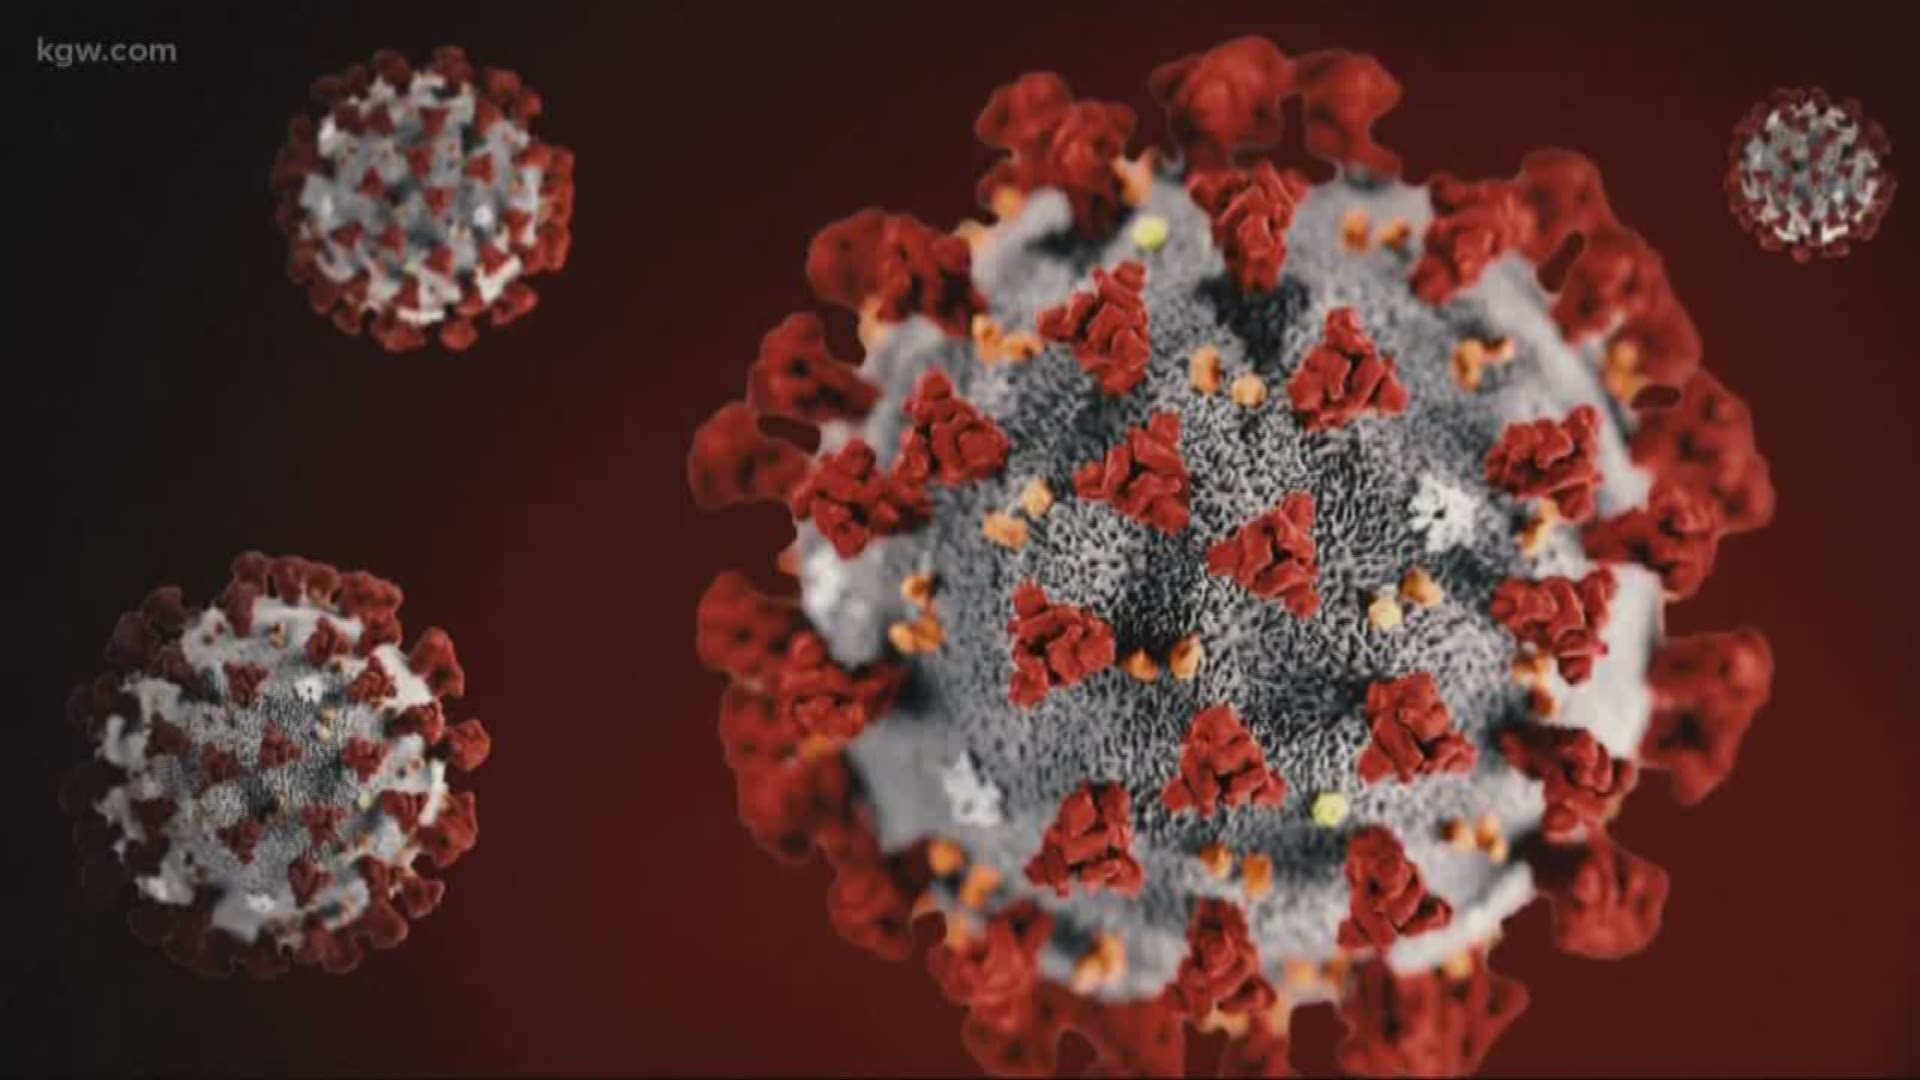 A Vancouver-based company believes it has the answer to fighting off the coronavirus.